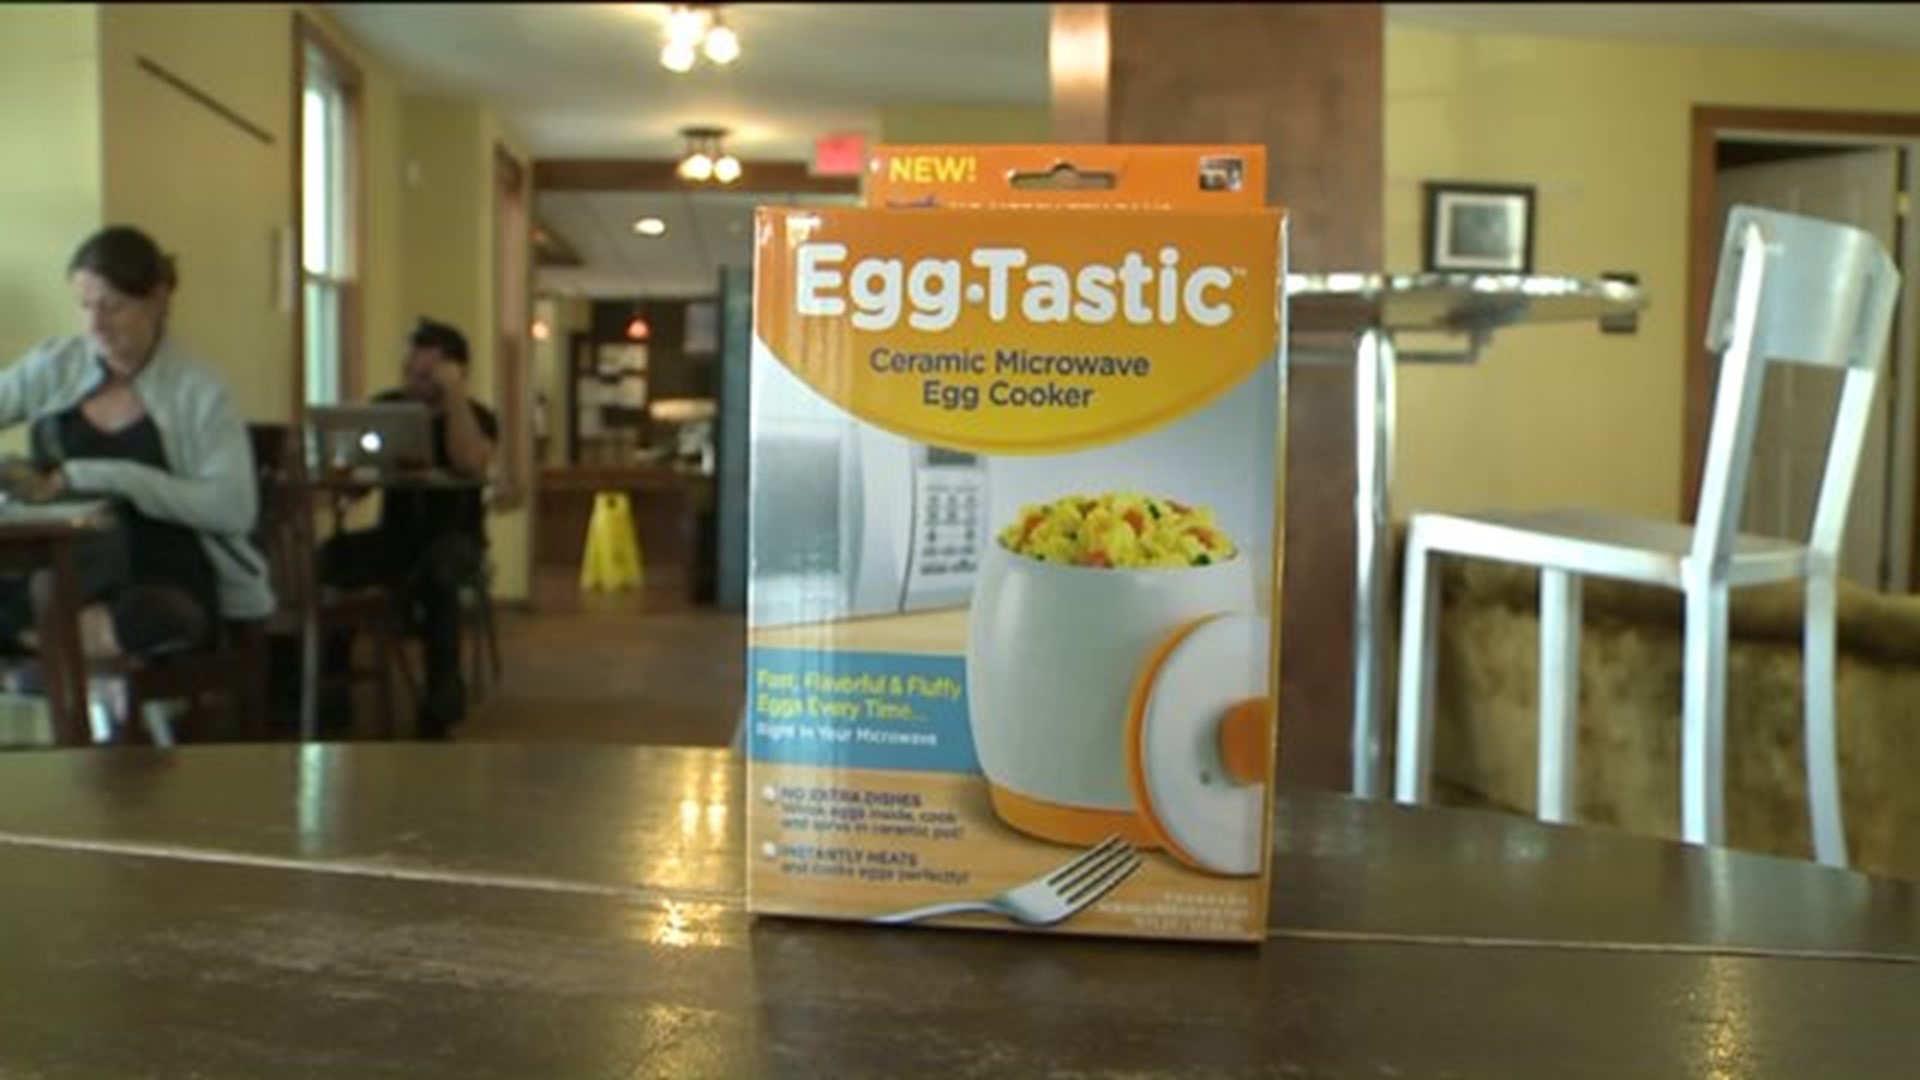 Does It Really Work? Egg-Tastic